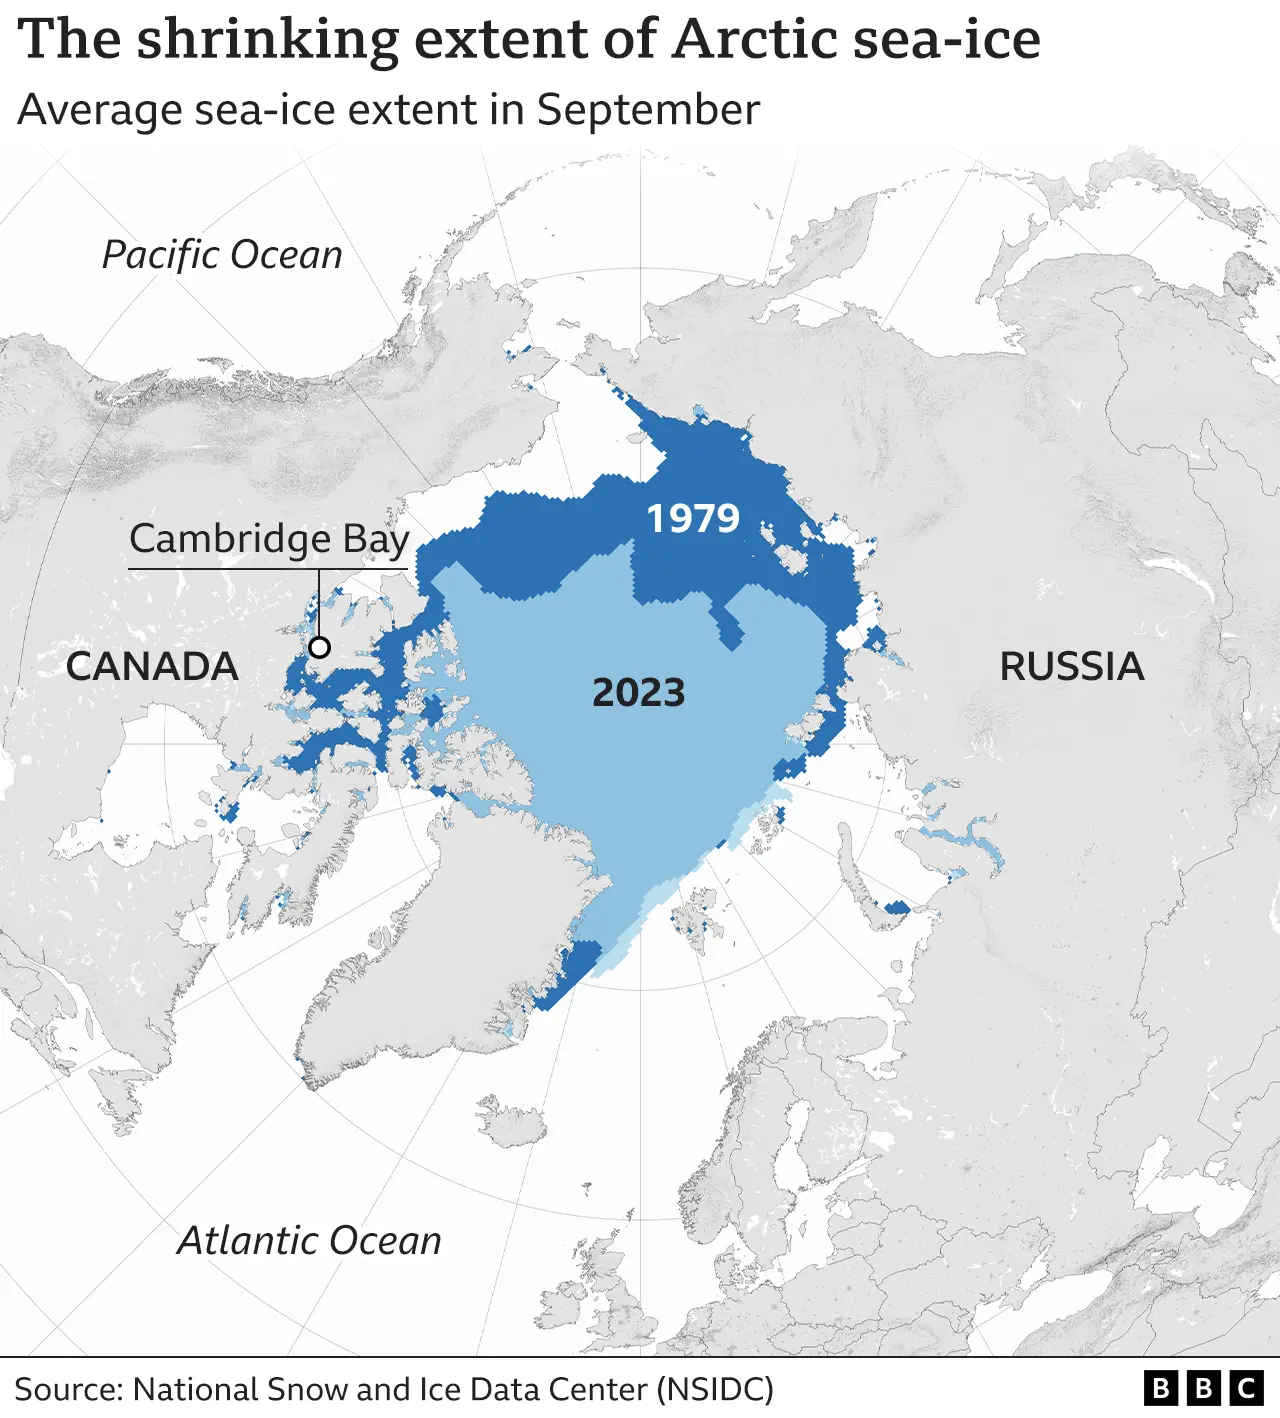 Map showing extent of the Arctic's sea-ice in September 1979 versus September 2023. Much less sea-ice is present in 2023, especially to the north-east of Russia.